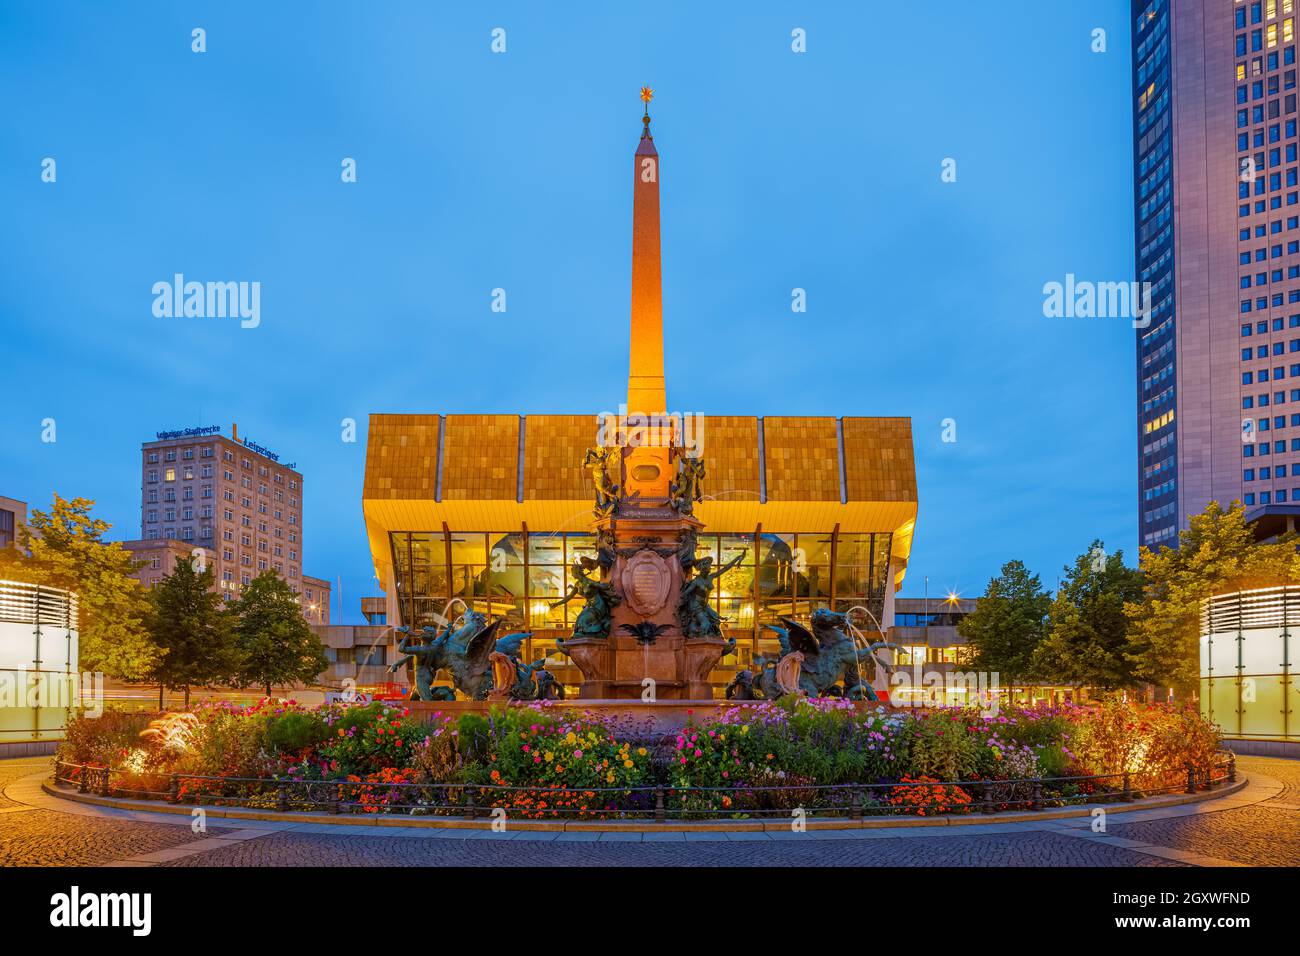 Downtown in Leipzig in evening blue hour light with the The Mende Fountain, located at Augustusplatz in front of the Gewandhaus (Concert Hall). It is Stock Photo